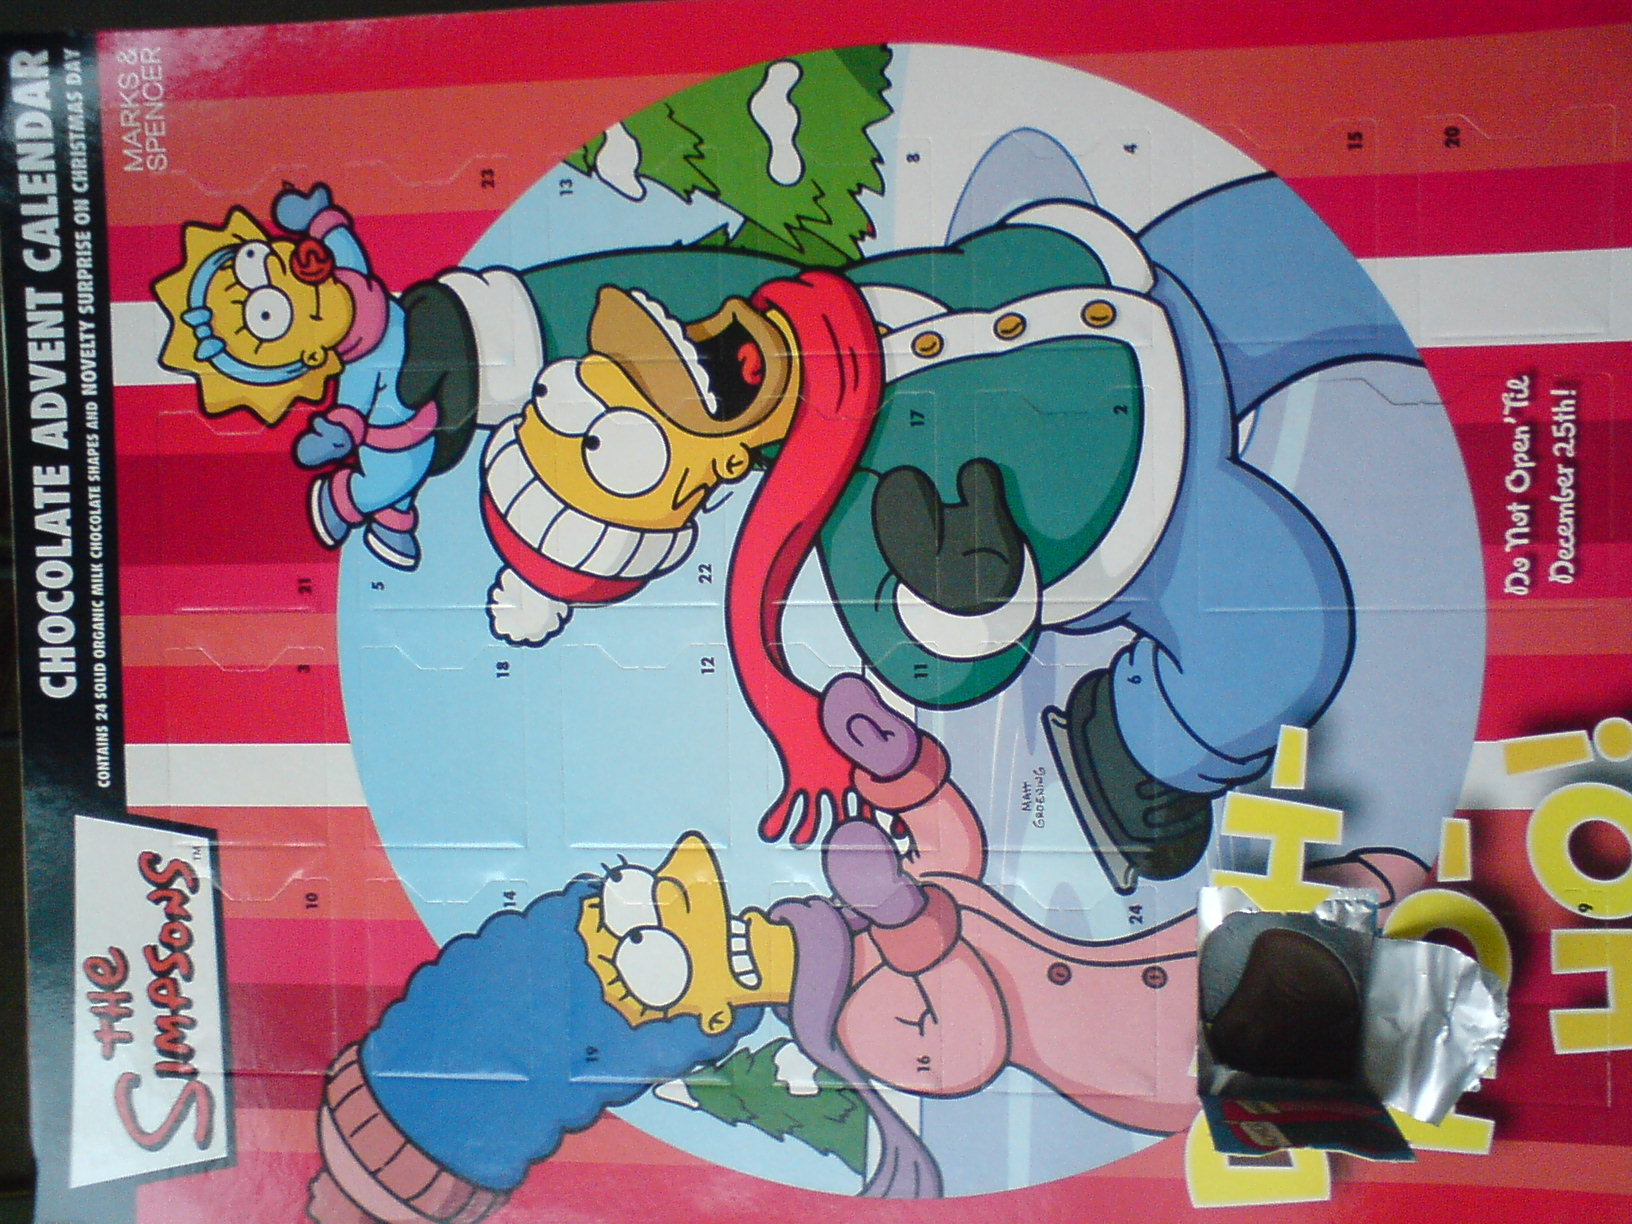 The Simpsons Advent Calendar Wikisimpsons, the Simpsons Wiki